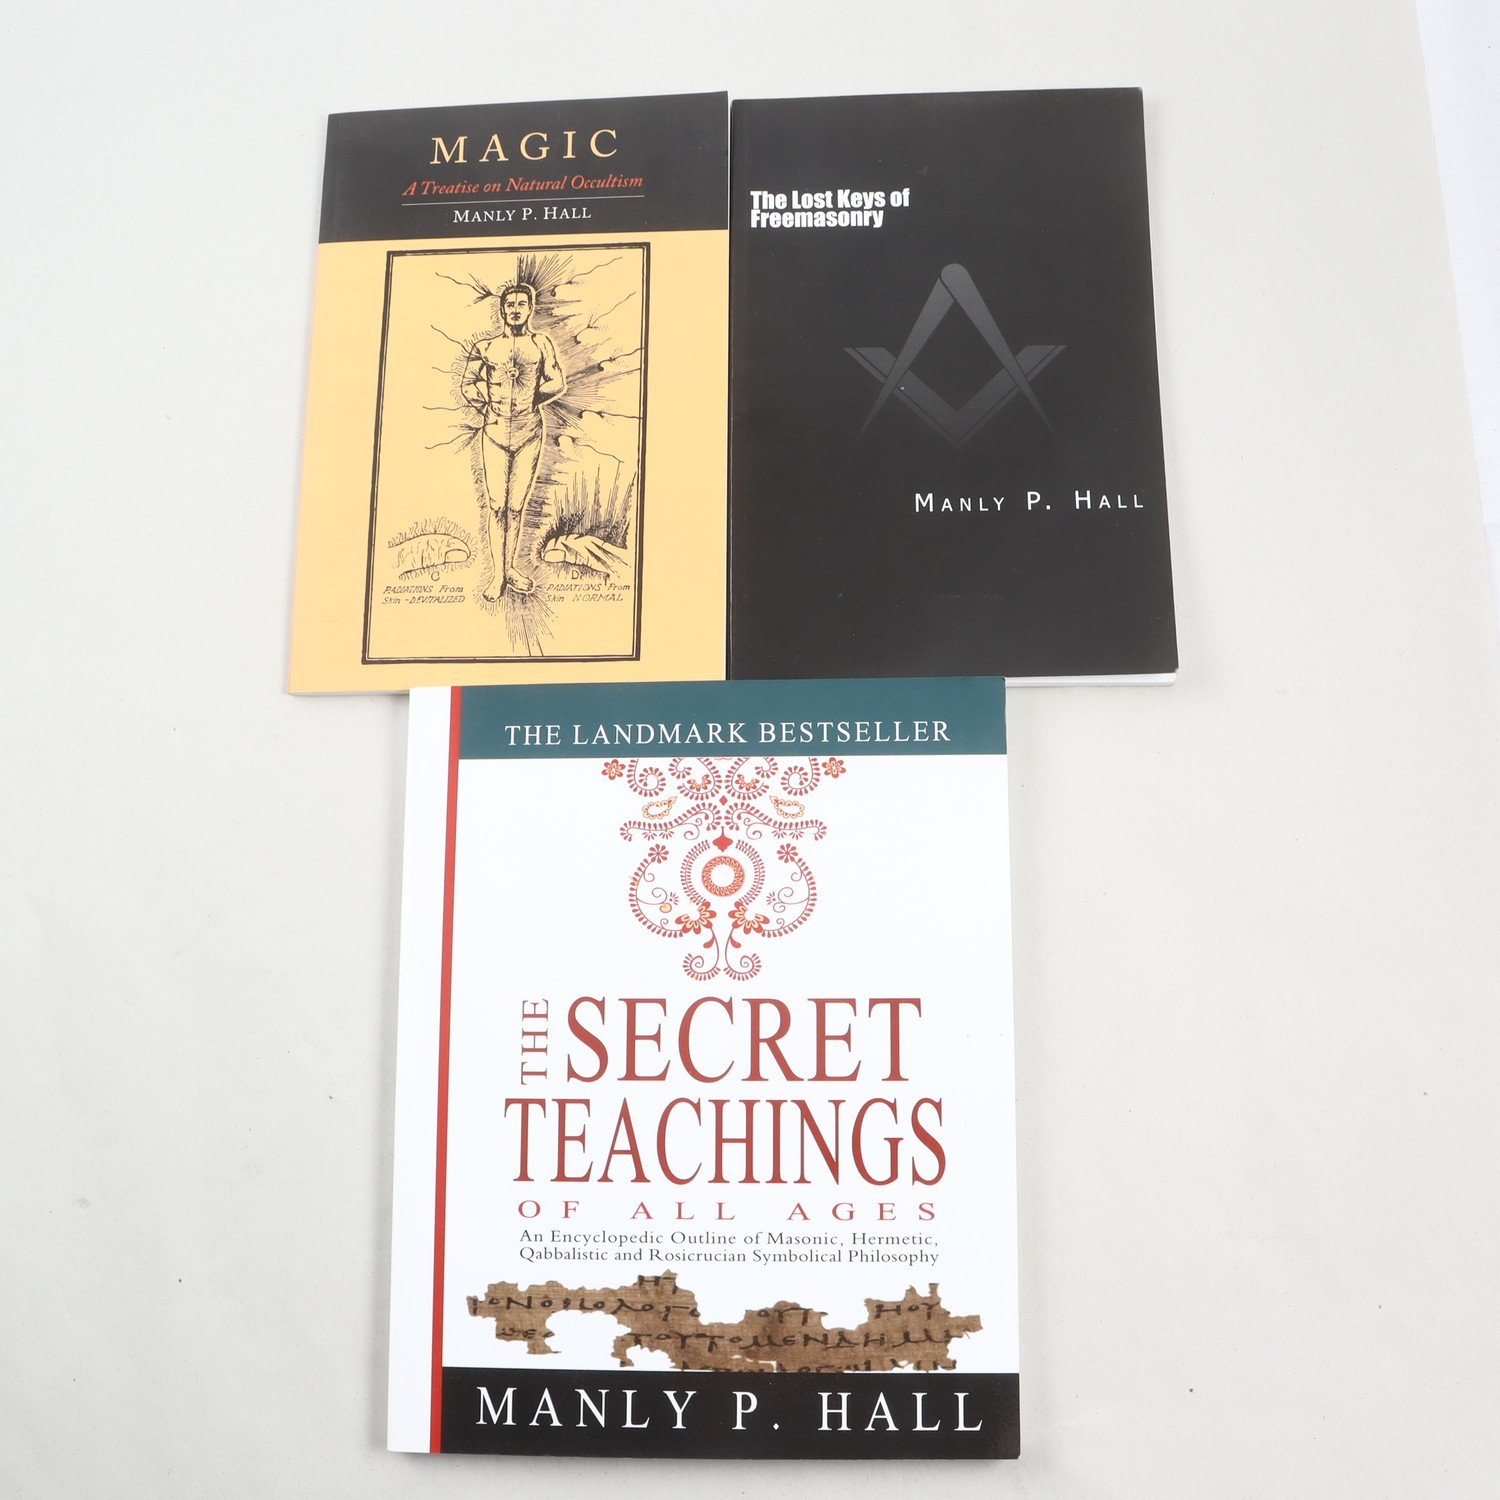 Magic: A Treatise on Natural Occultism, Manly P. Hall + 2